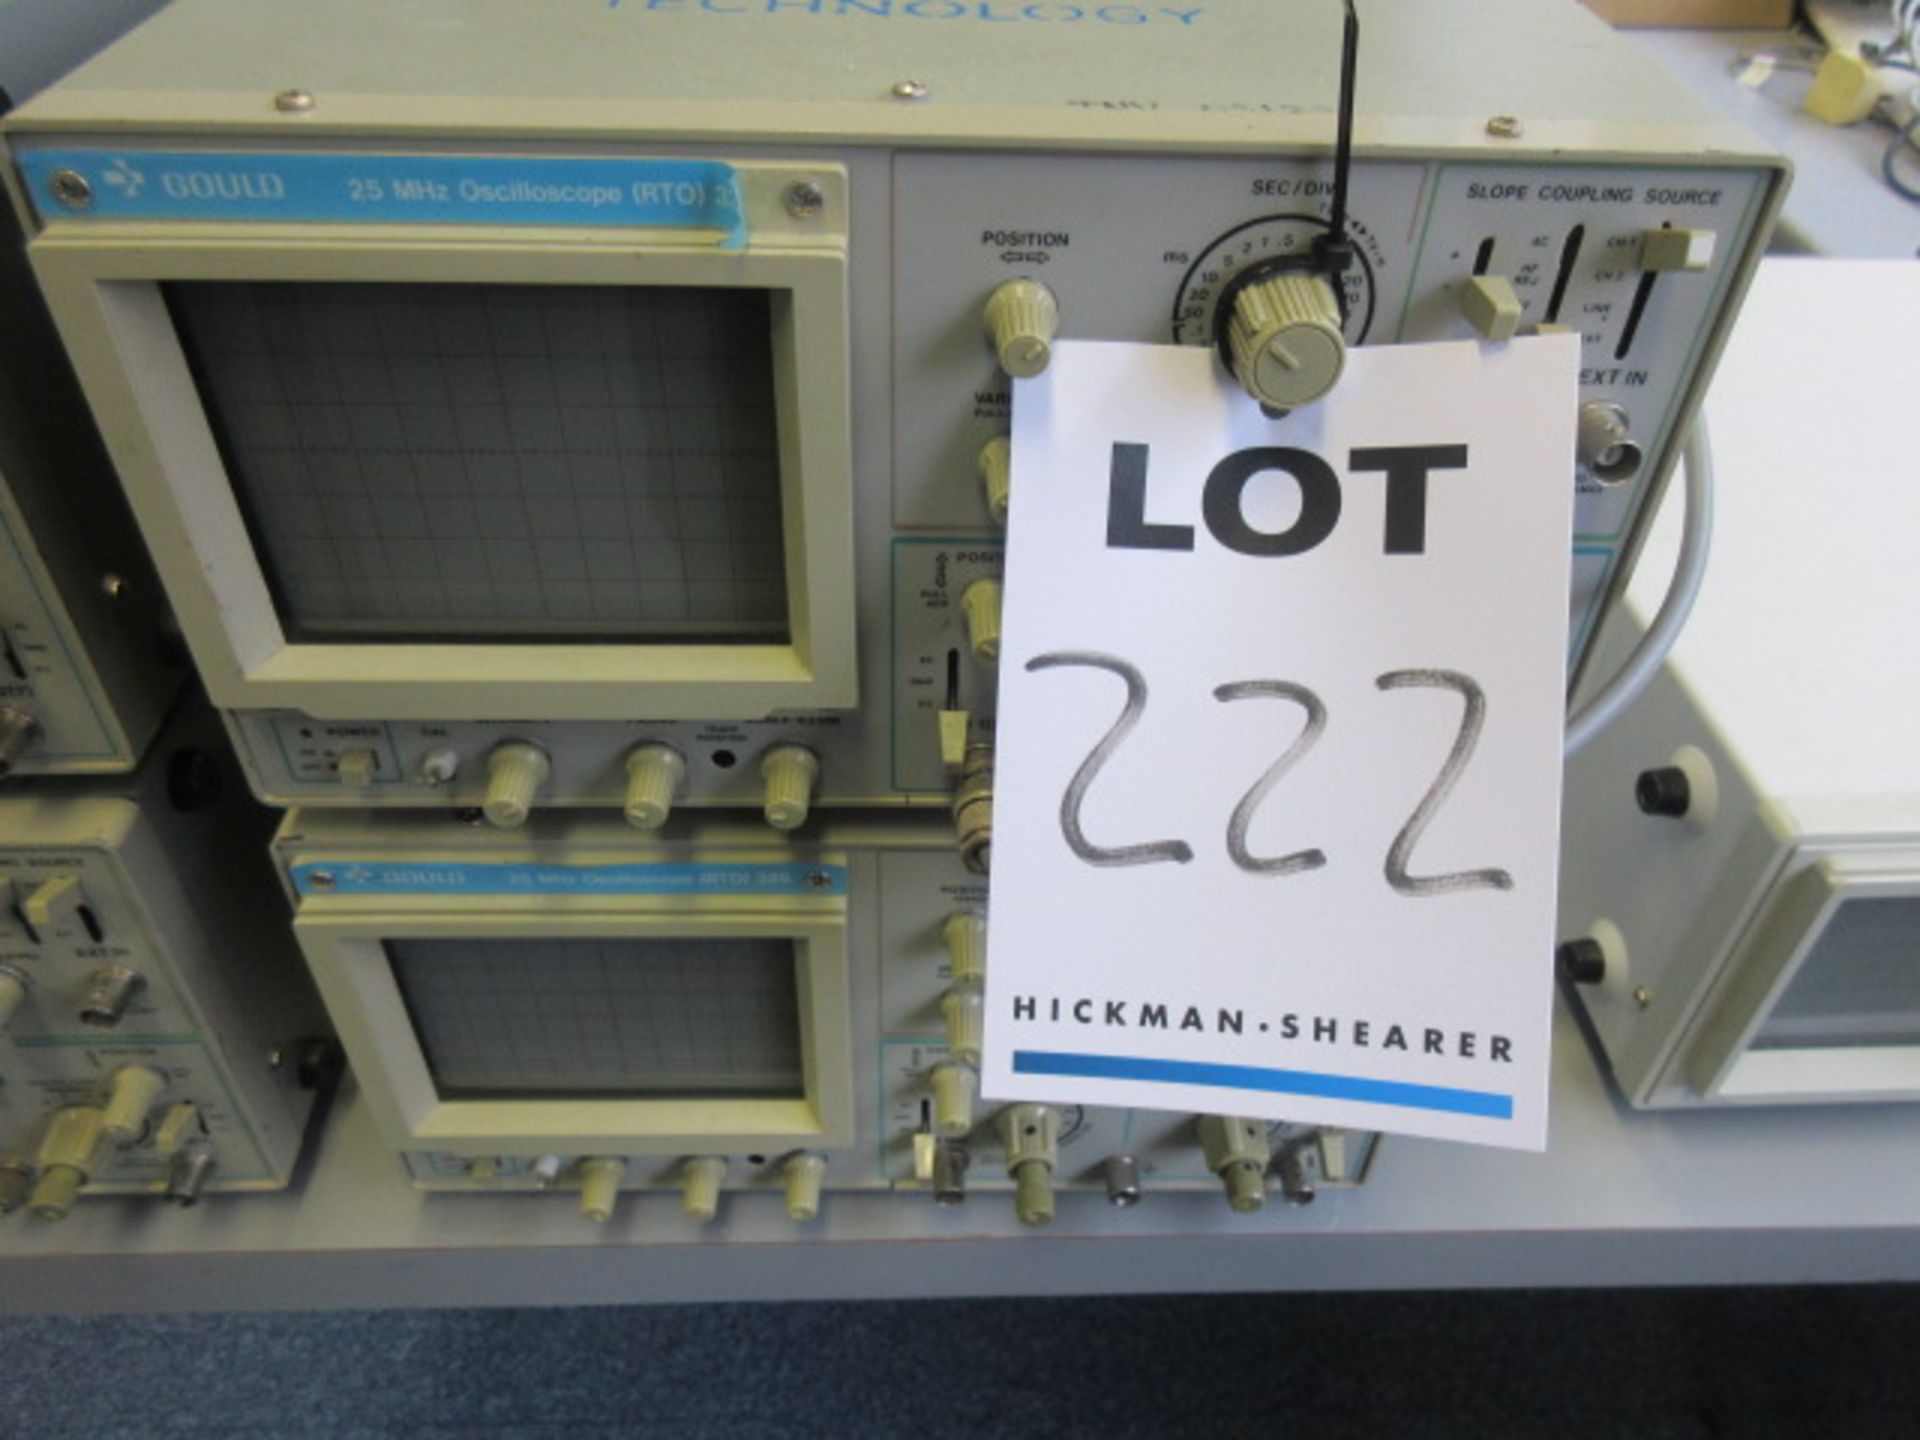 TWO GOULD 25 MHz (rto) 325 OSCILLOSCOPES - Image 3 of 3